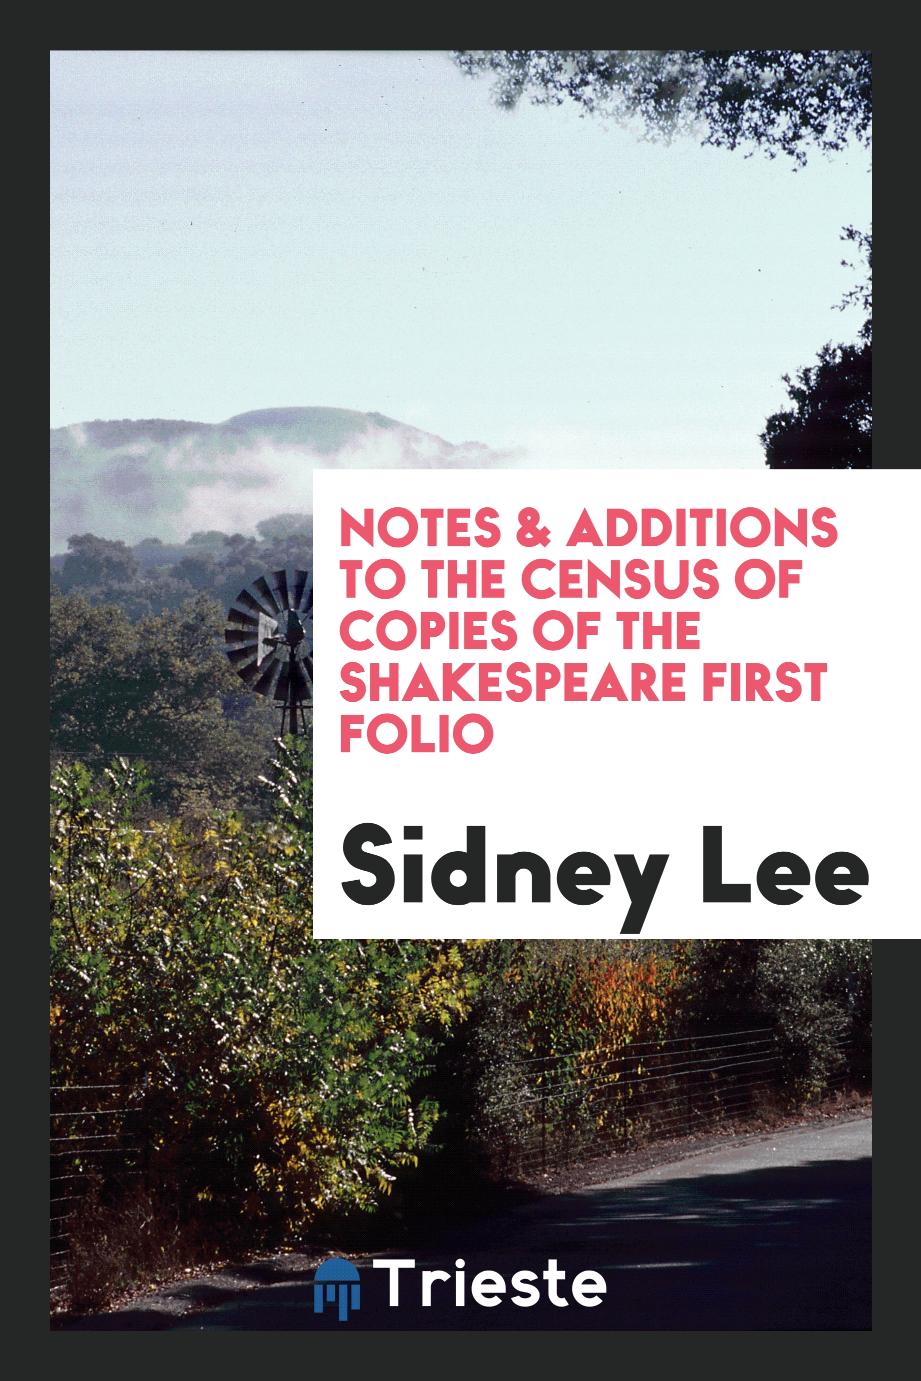 Sidney Lee - Notes & Additions to the Census of Copies of the Shakespeare First Folio